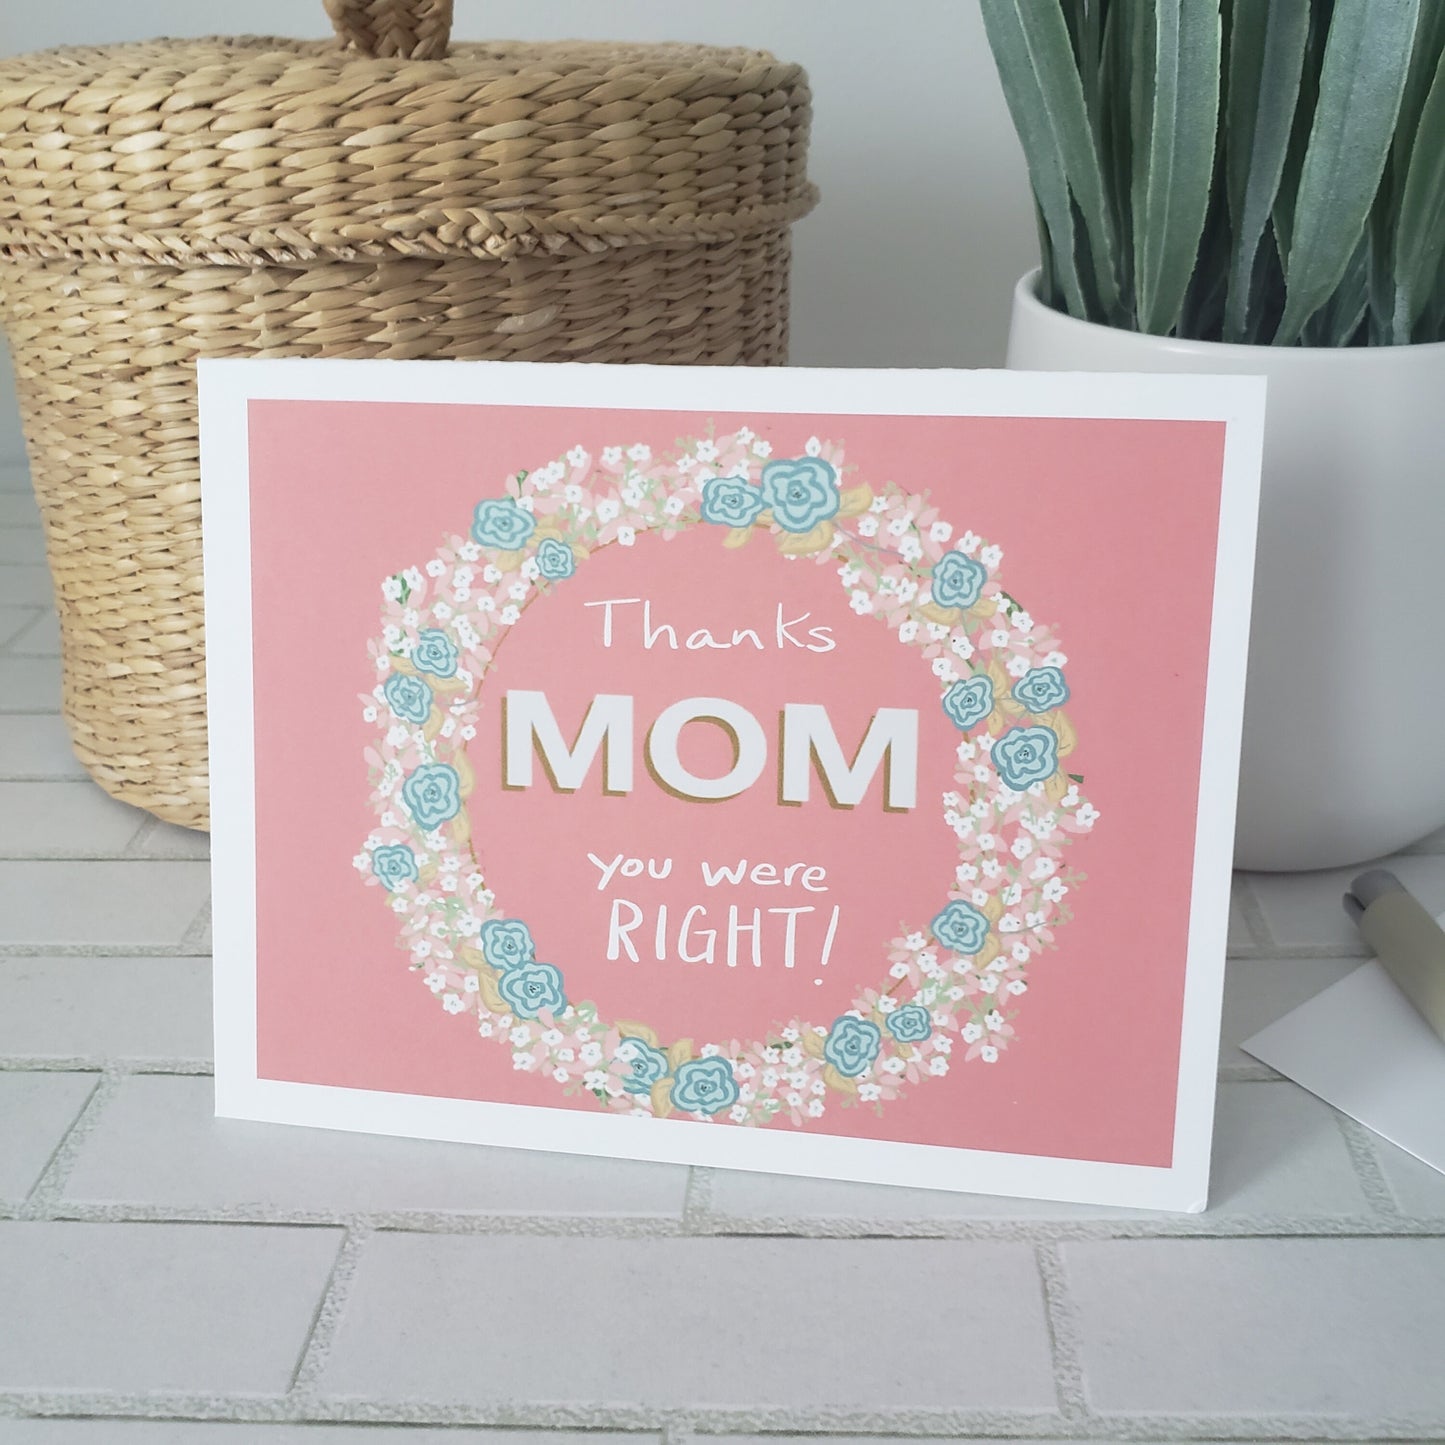 Mother’s Day Card - Thanks Mom You Were Right - Hand Drawn Floral Wreath- Greeting Card In Pink Teal And Grey Colors